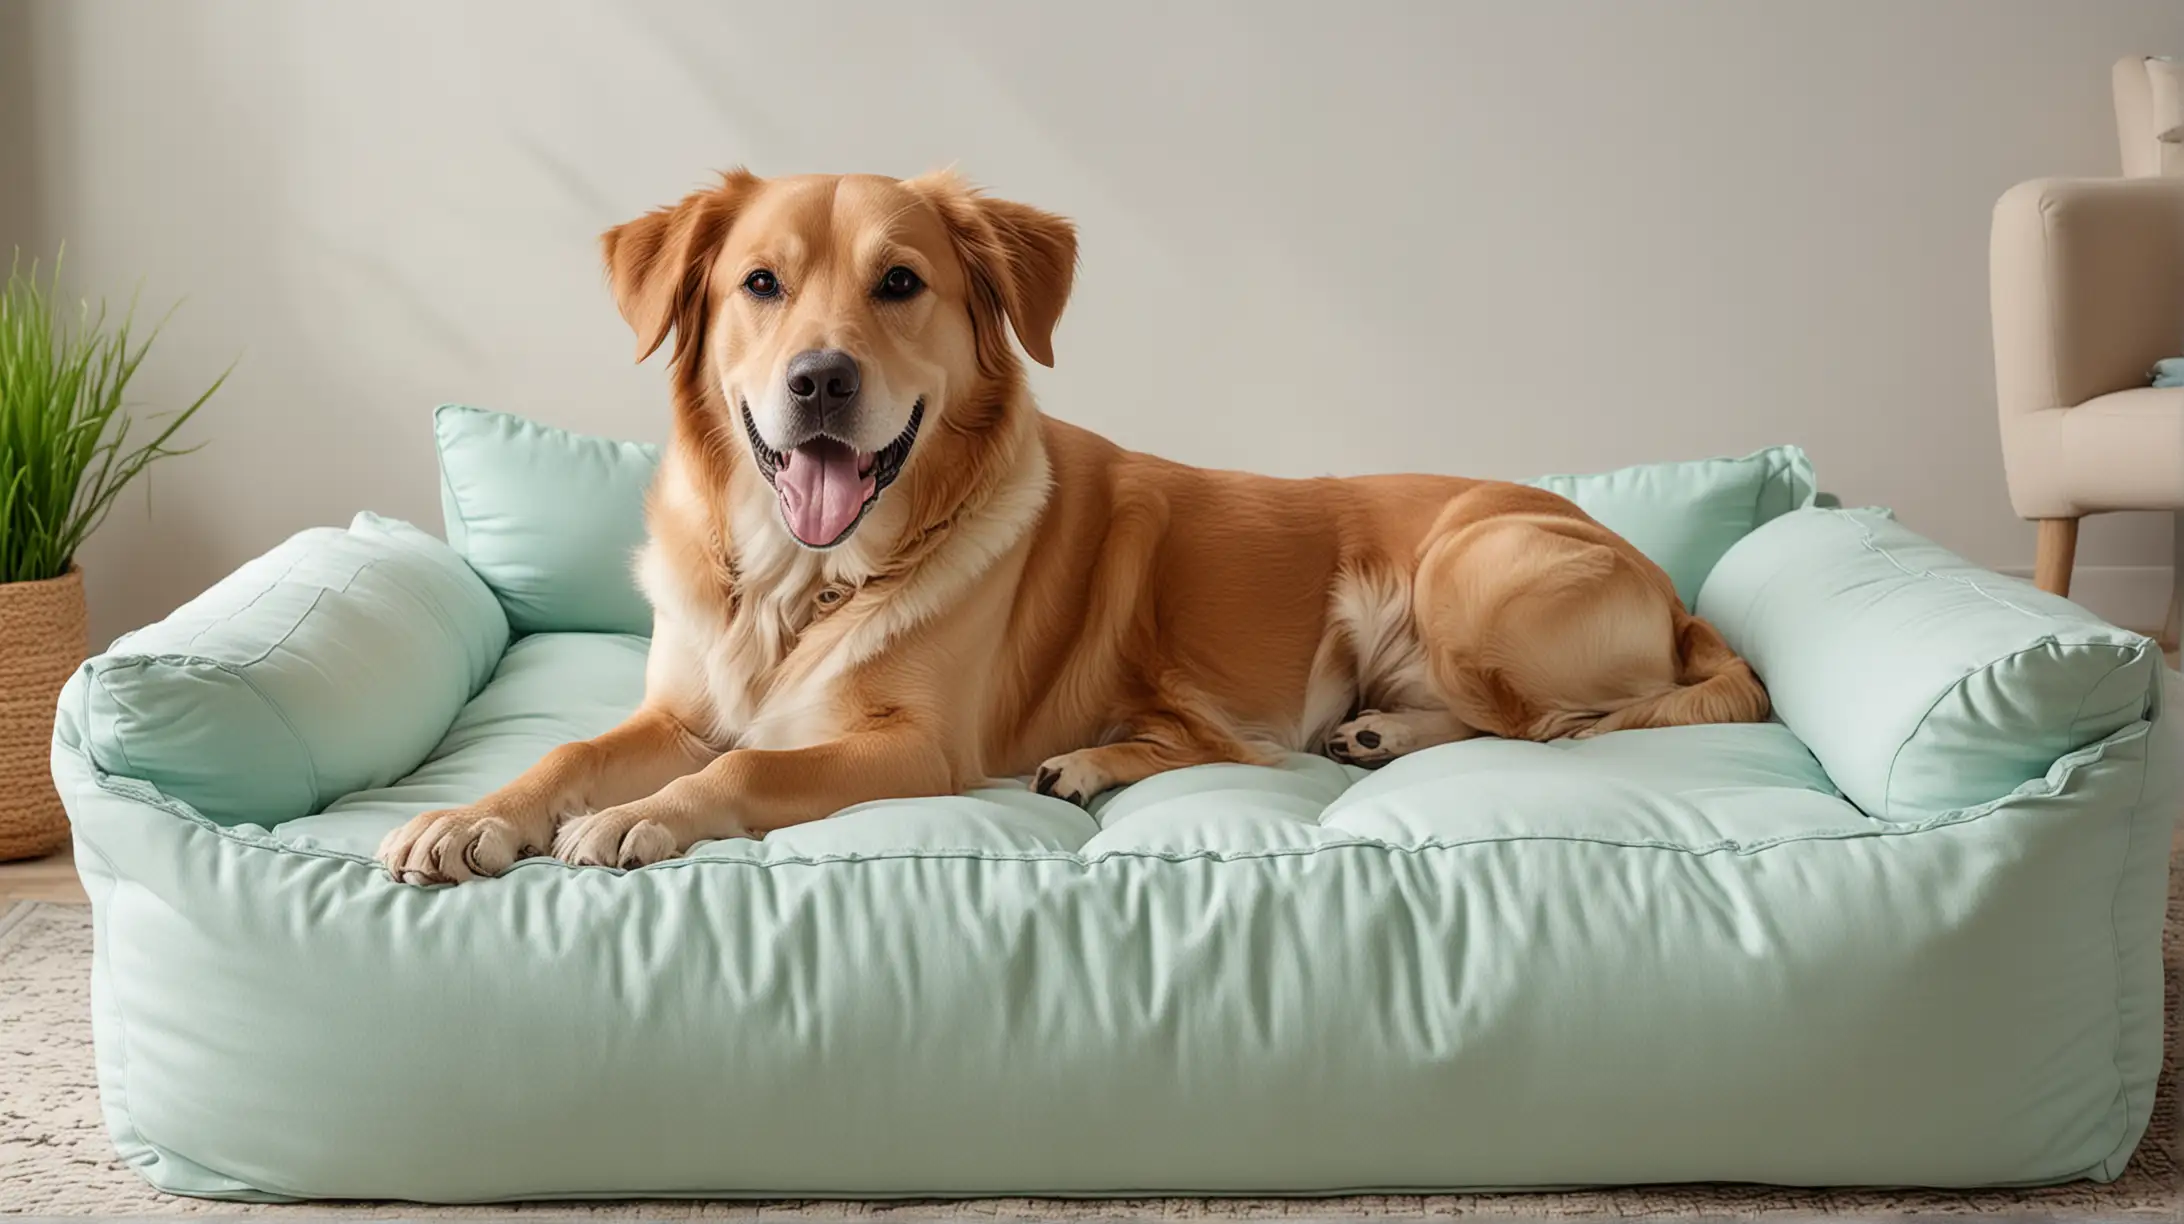 Happy Dog Relaxing on Mint and Sky Blue Couch Bed